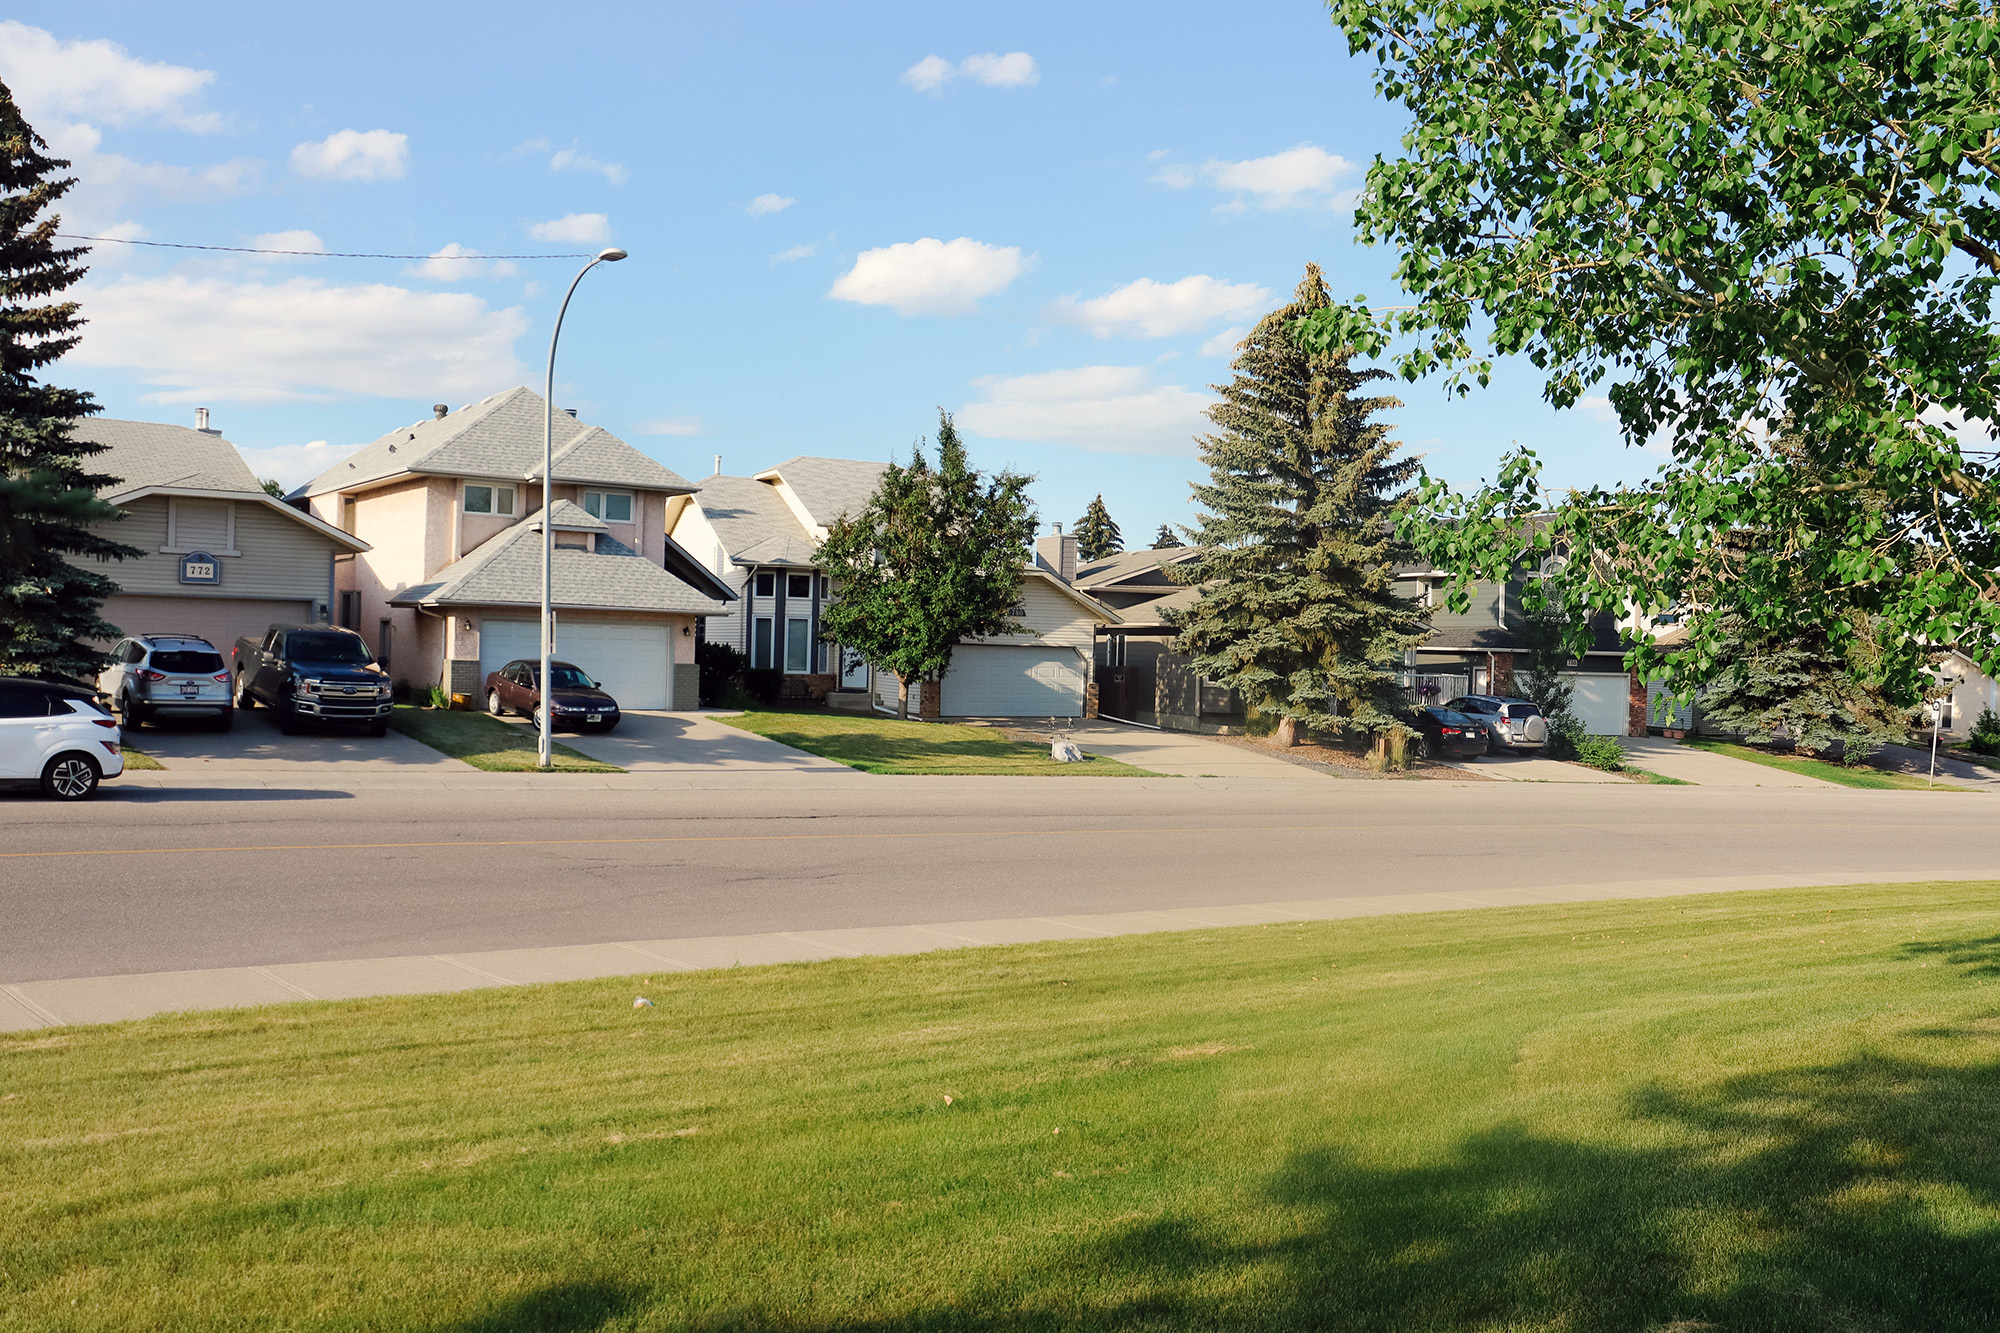 A residential street with single family homes for sale in the community of Riverbend, Calgary, AB